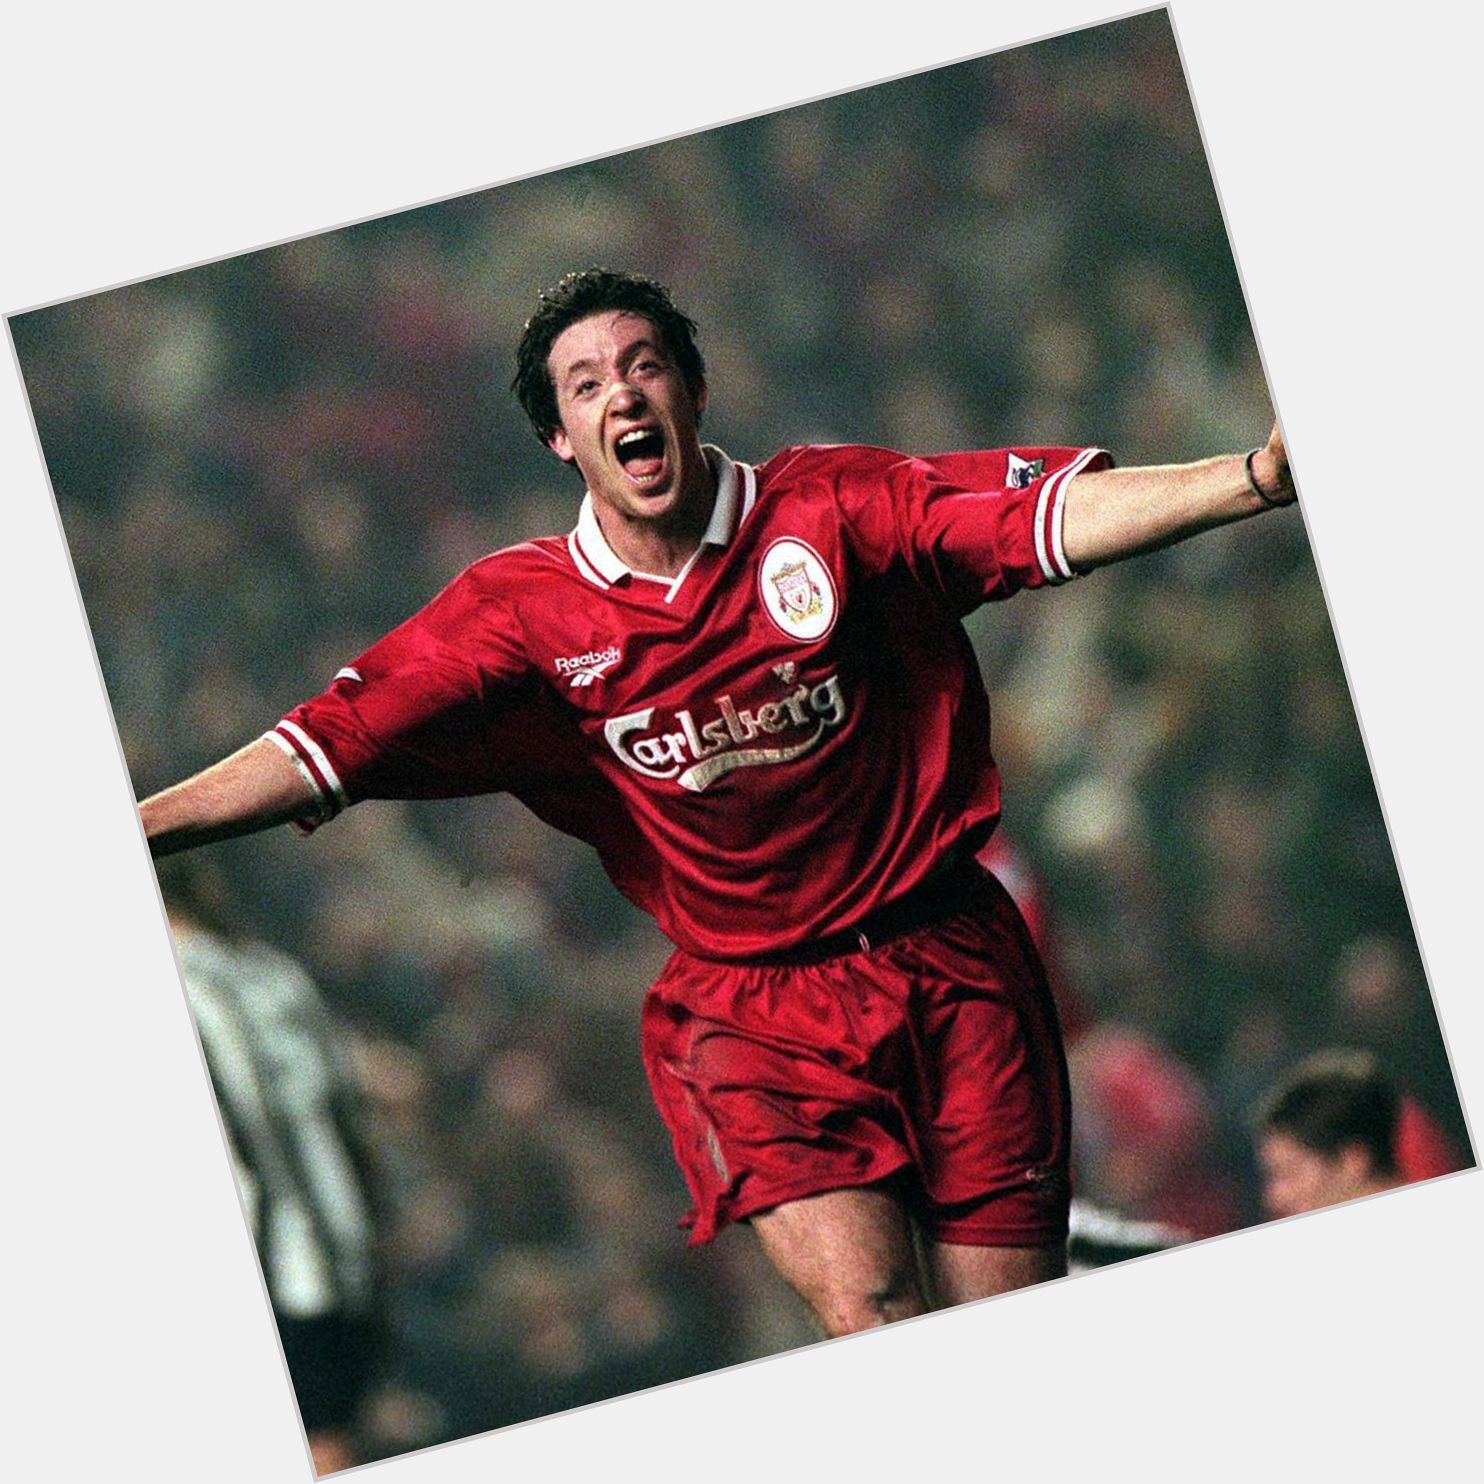 Who wore one of those strange nose things in the 90s?

Happy Birthday Robbie Fowler 